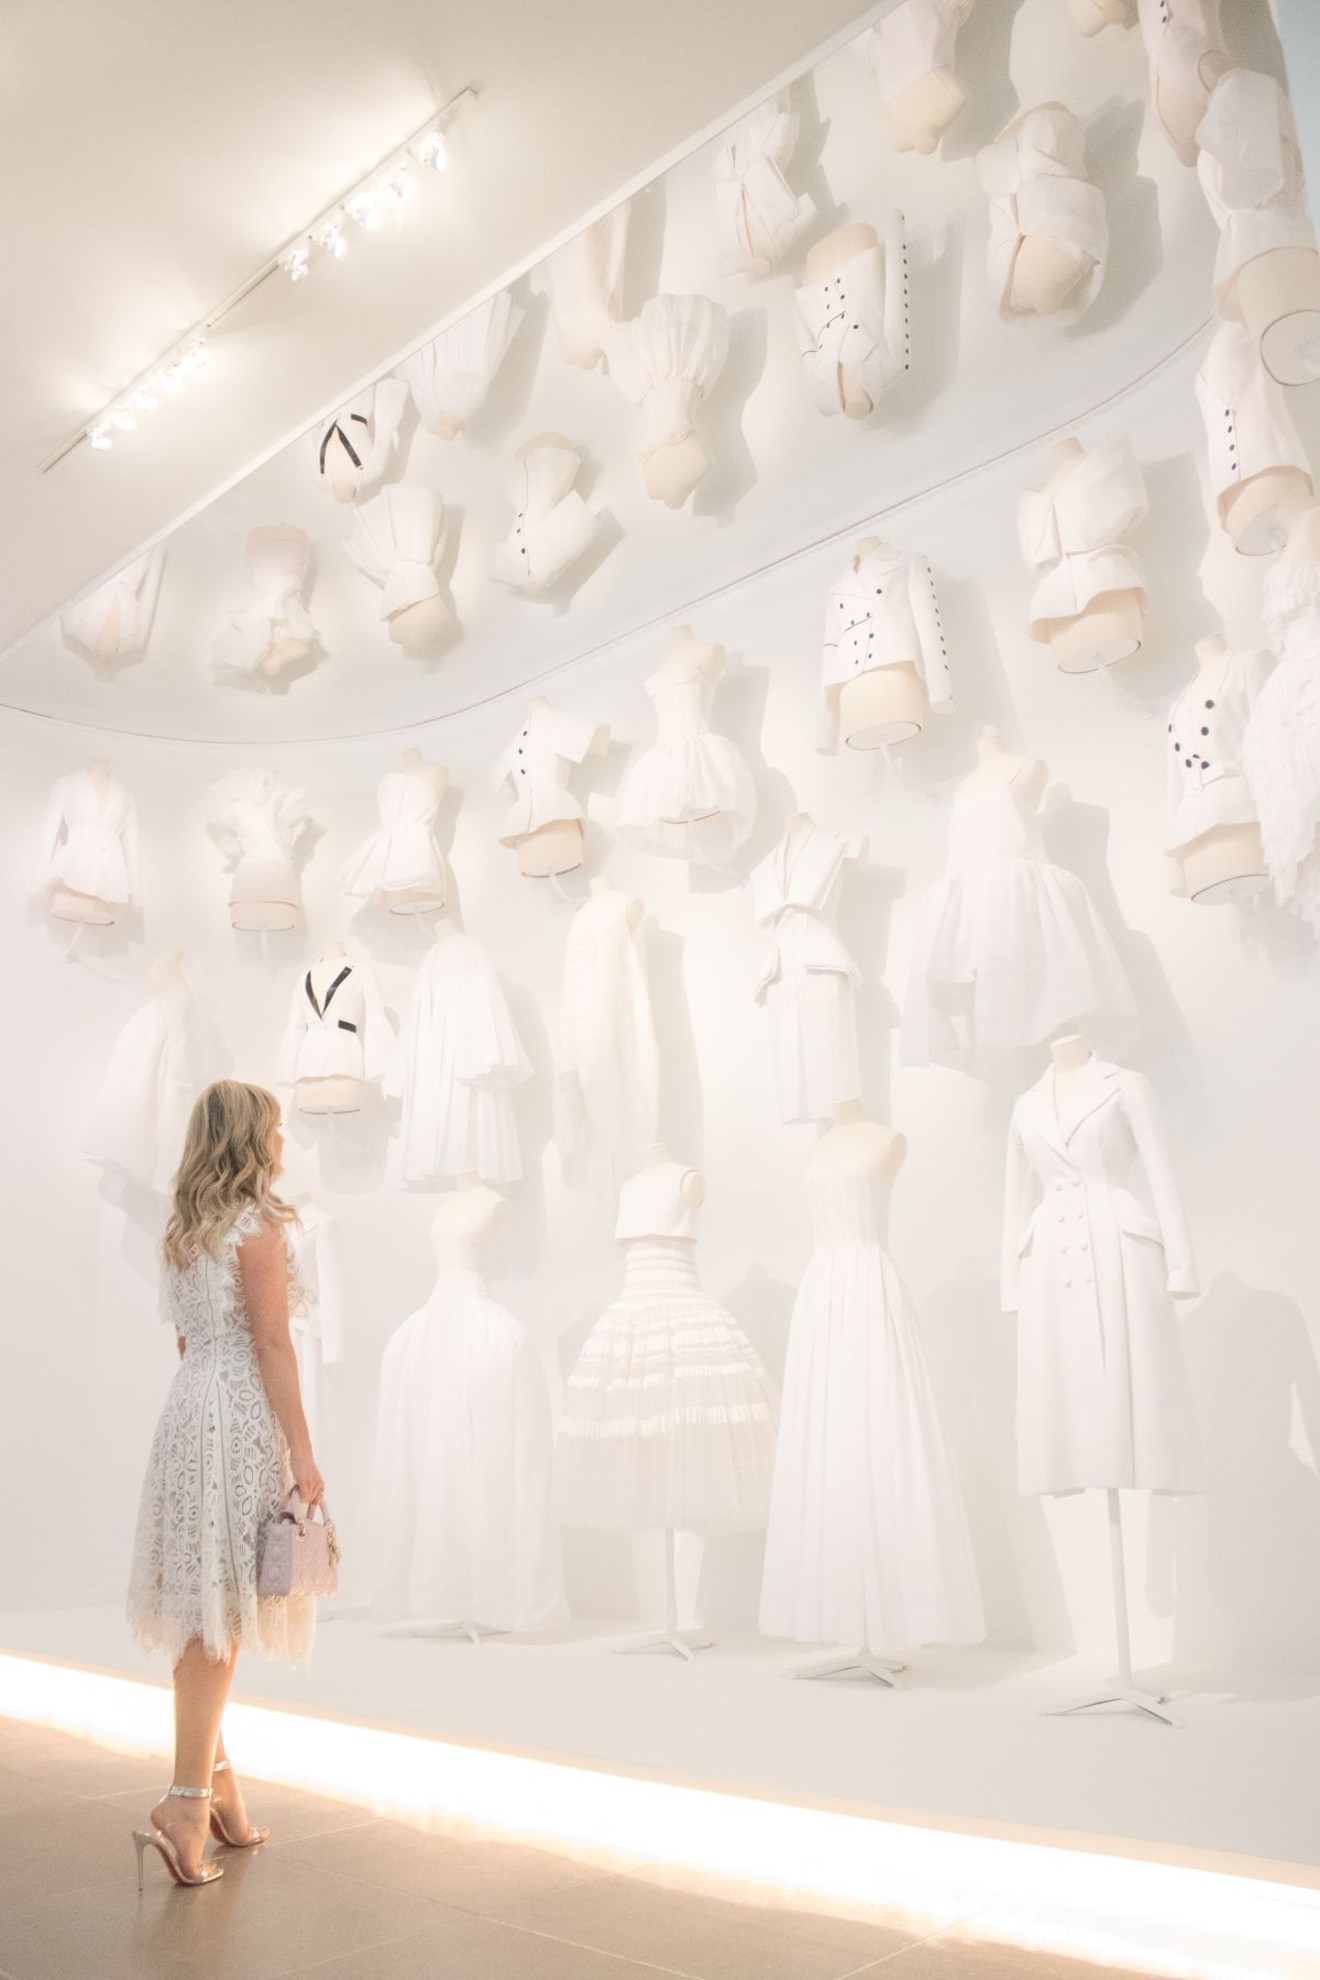 A row of white garments in the dazzling Dior retrospective at the DMA